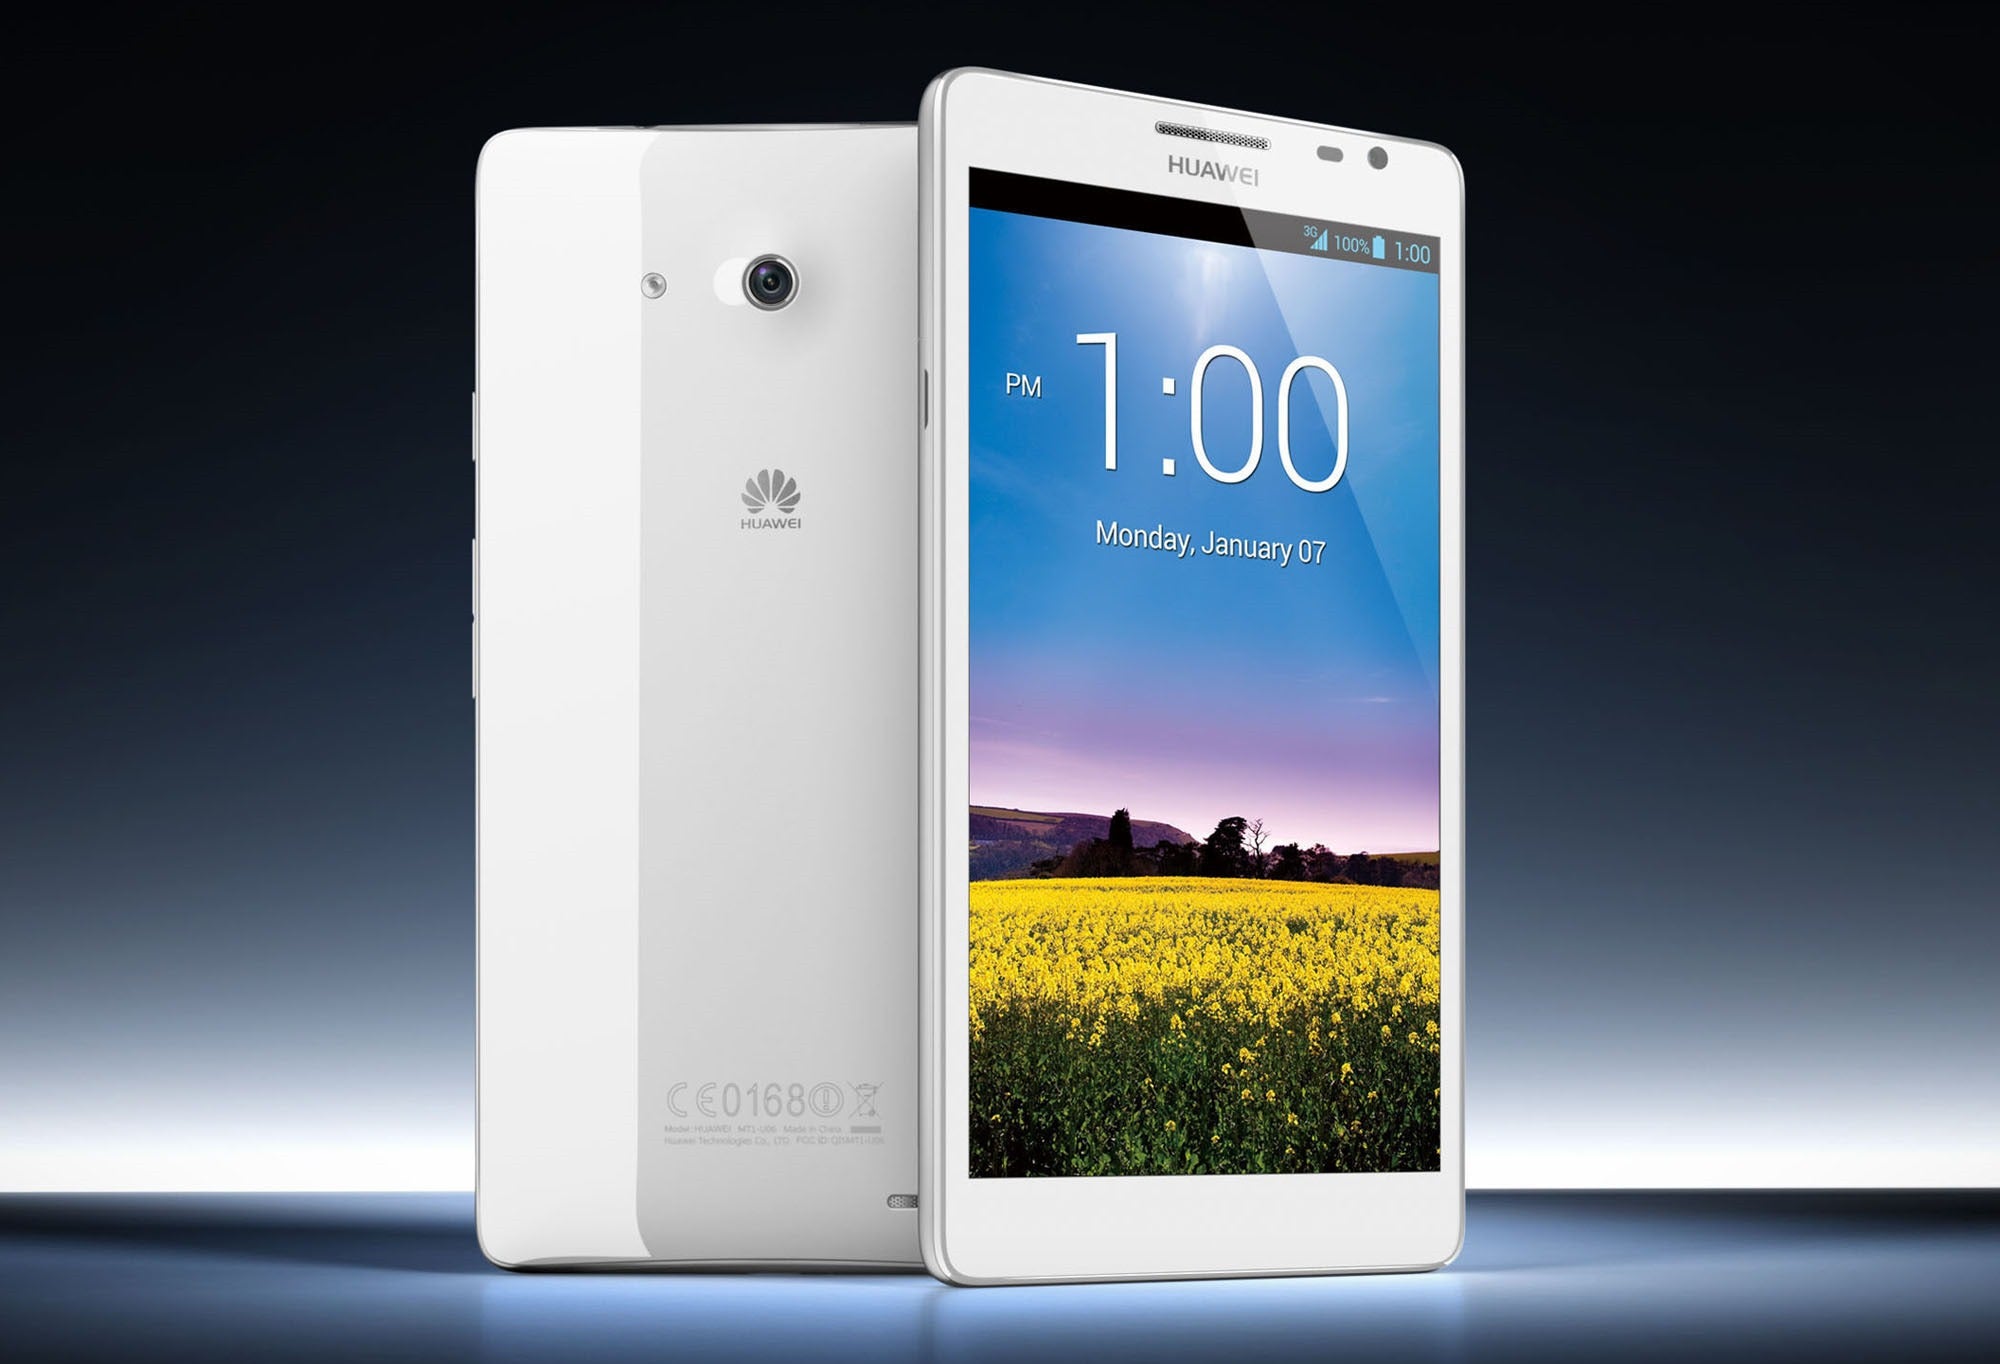 The 6.1 inch Huawei Ascend Mate - Huawei's goal is to be one of the top three global smartphone manufacturers